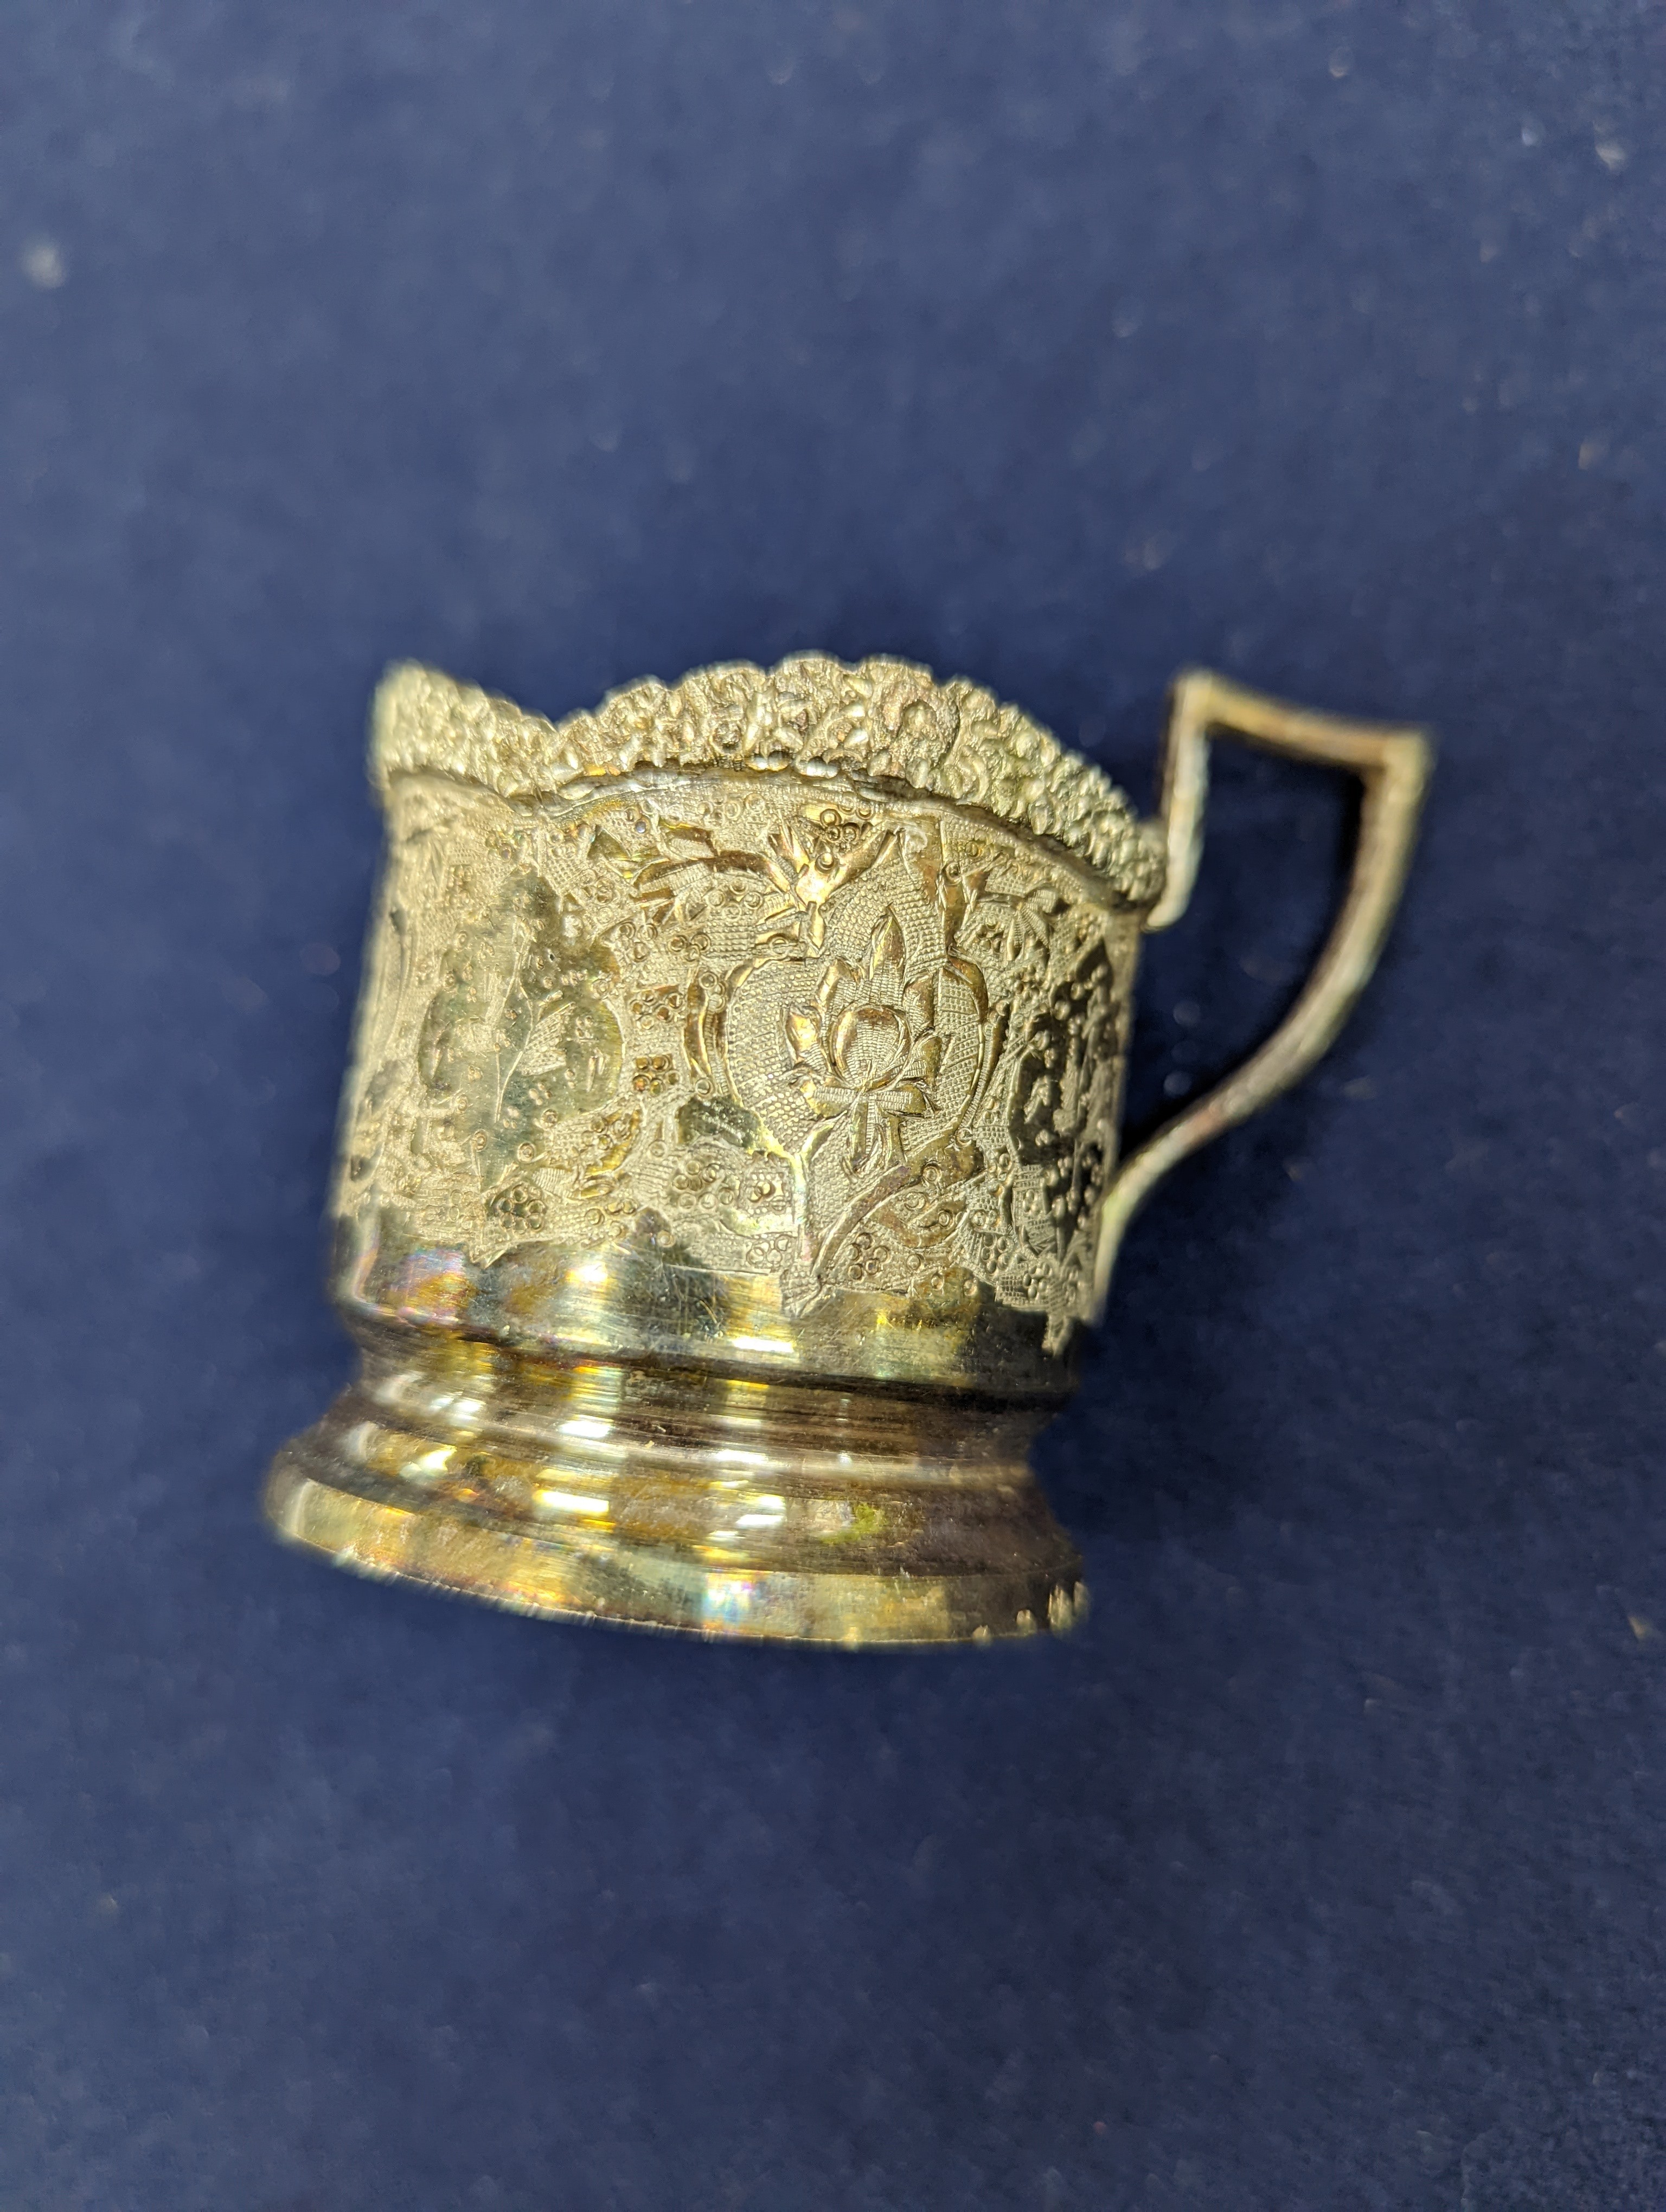 A set of six Persian embossed 84 standard white metal coffee cup holders and matching sugar bowl and cover by Vartan and four other Persian white metal items.